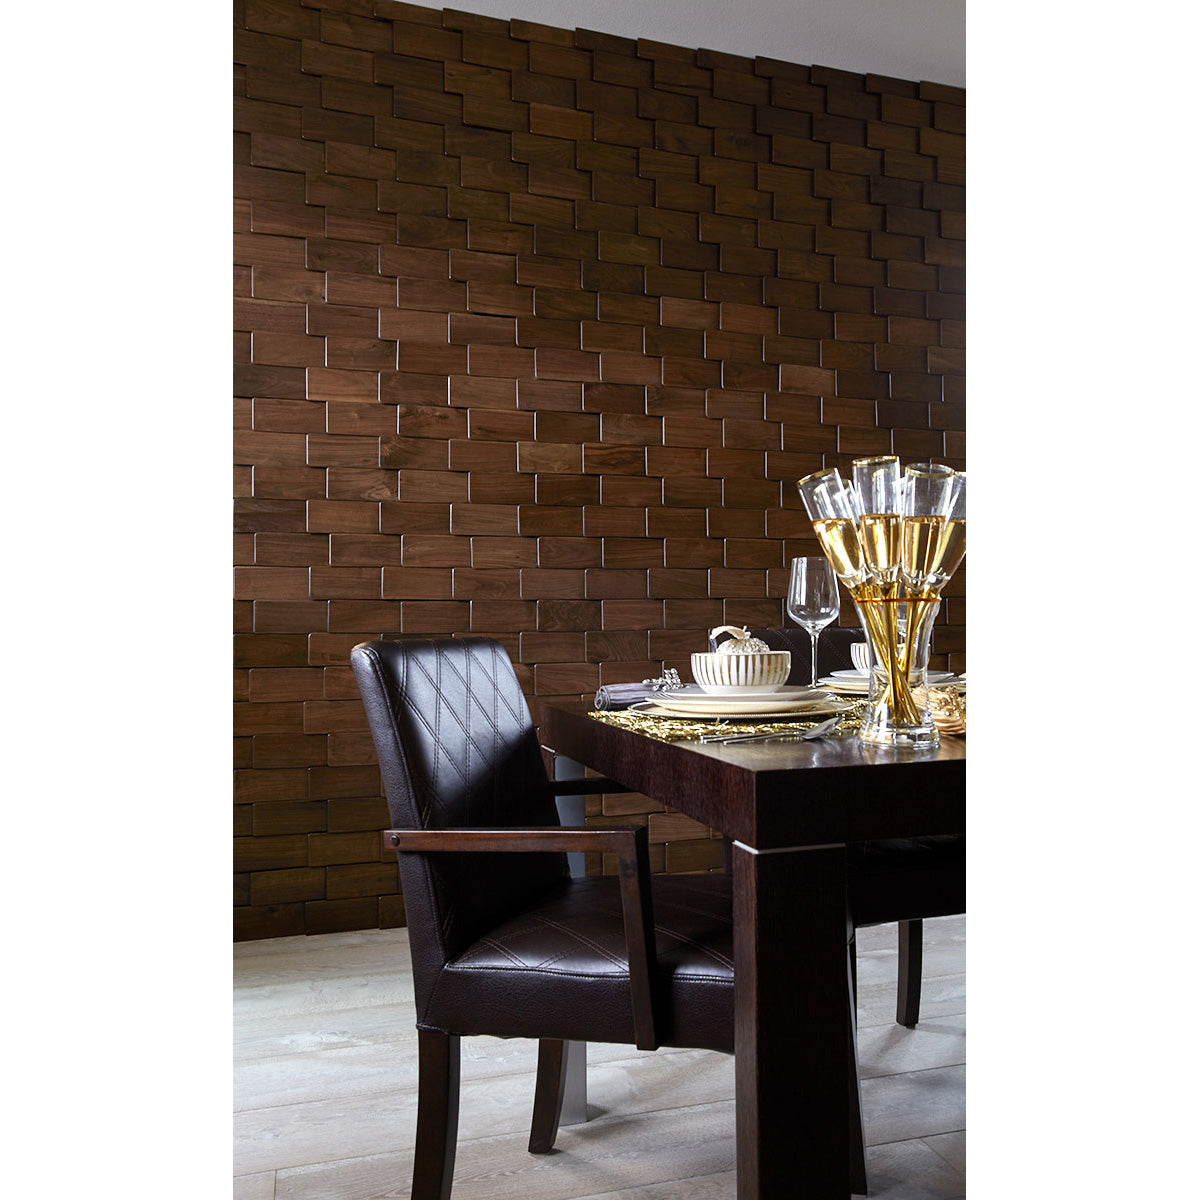 DuChateau - Scale Reckt Wall Coverings - Gold